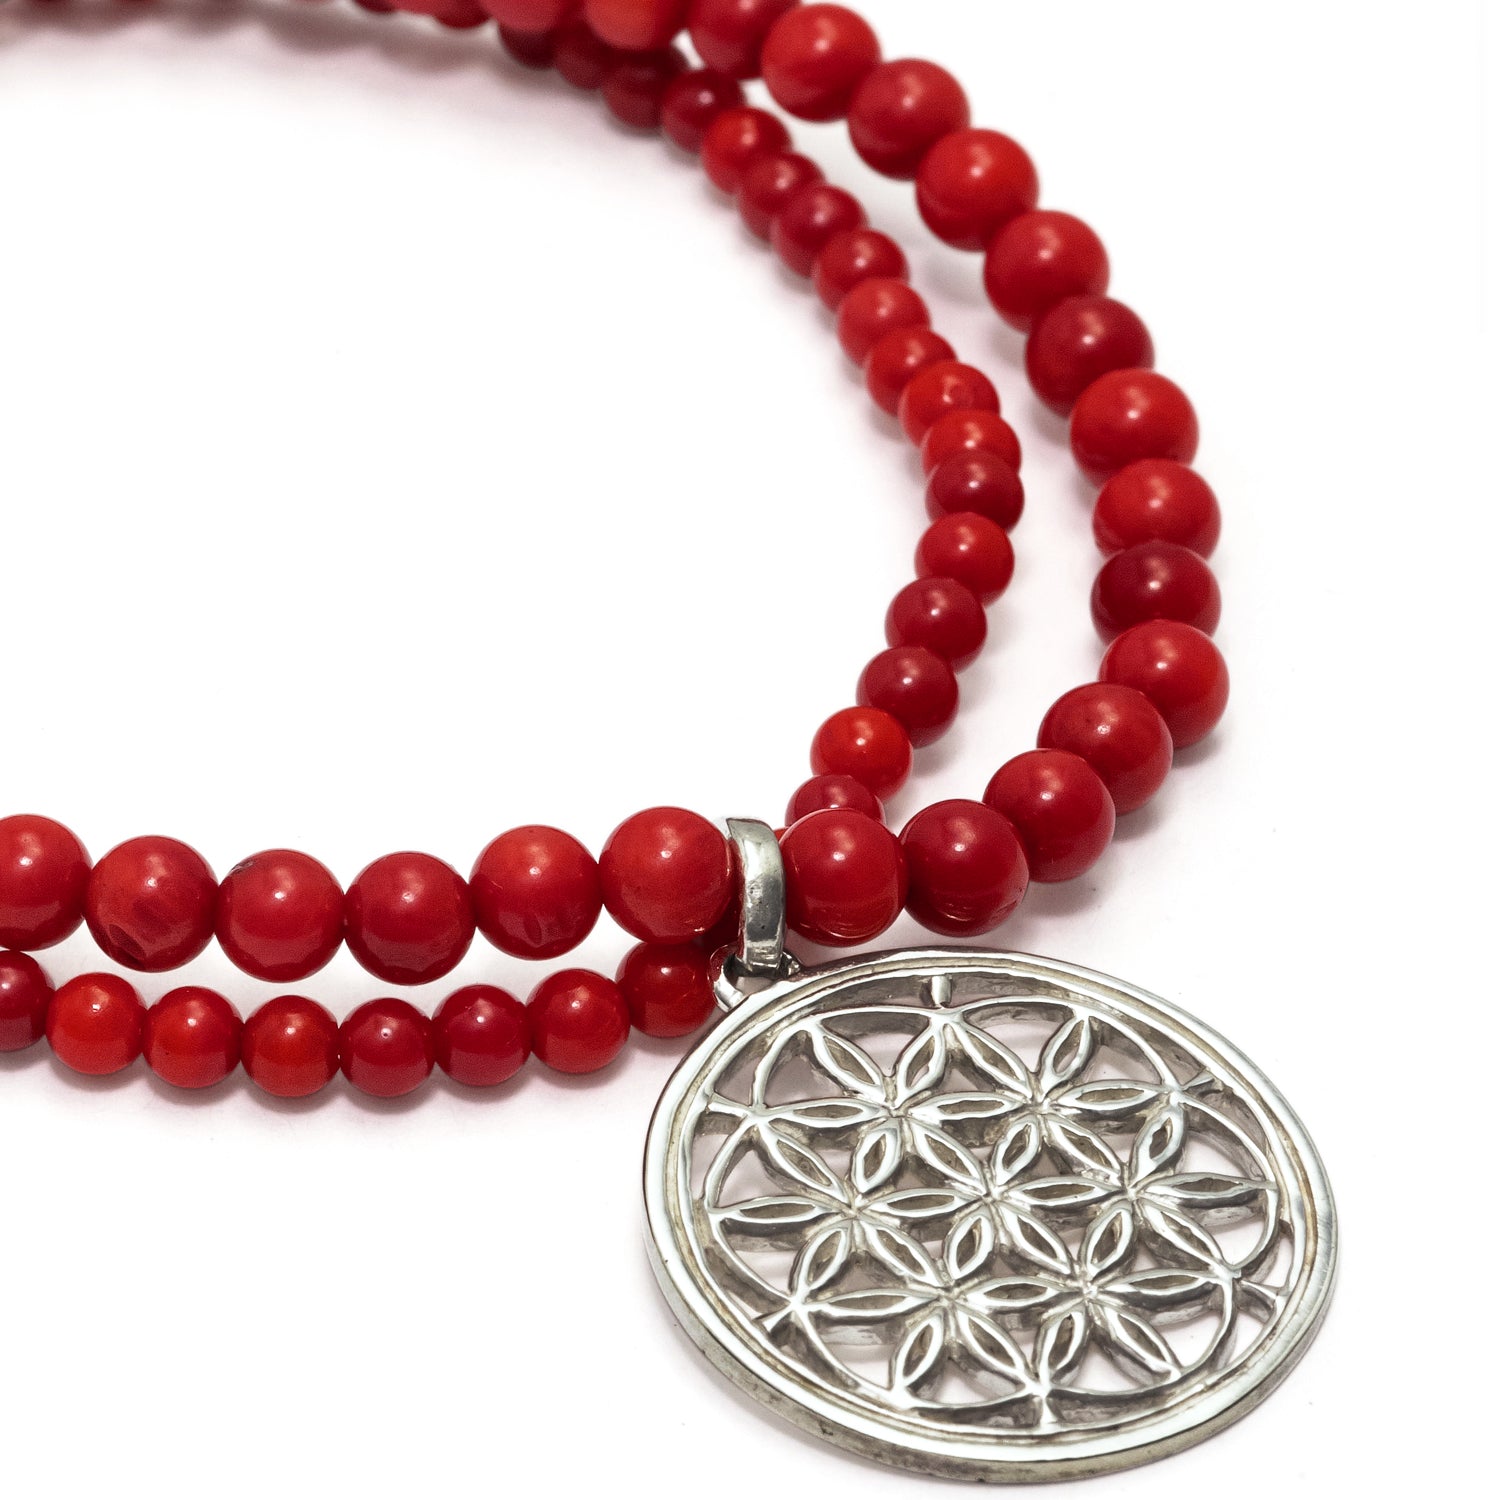 Coral bracelet with flower of life amulet made of sterling silver